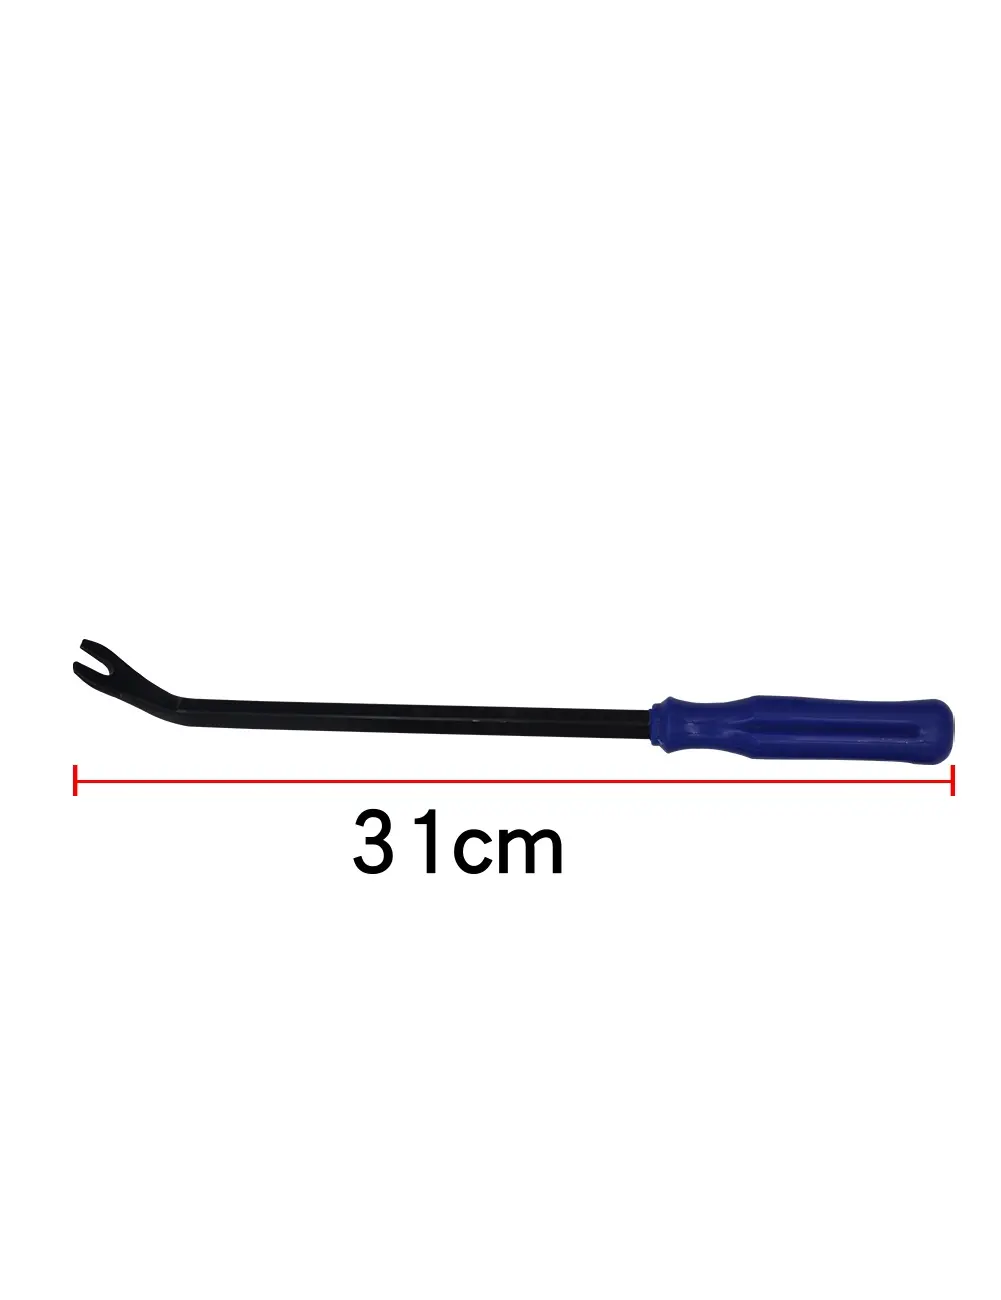 3PCS/SET High-quality Red/blue Car Door Panel Clips Pliers Trim Removal Fastener Tool Kit Plastic Pry Tool 35X25X5 Cm About 550g